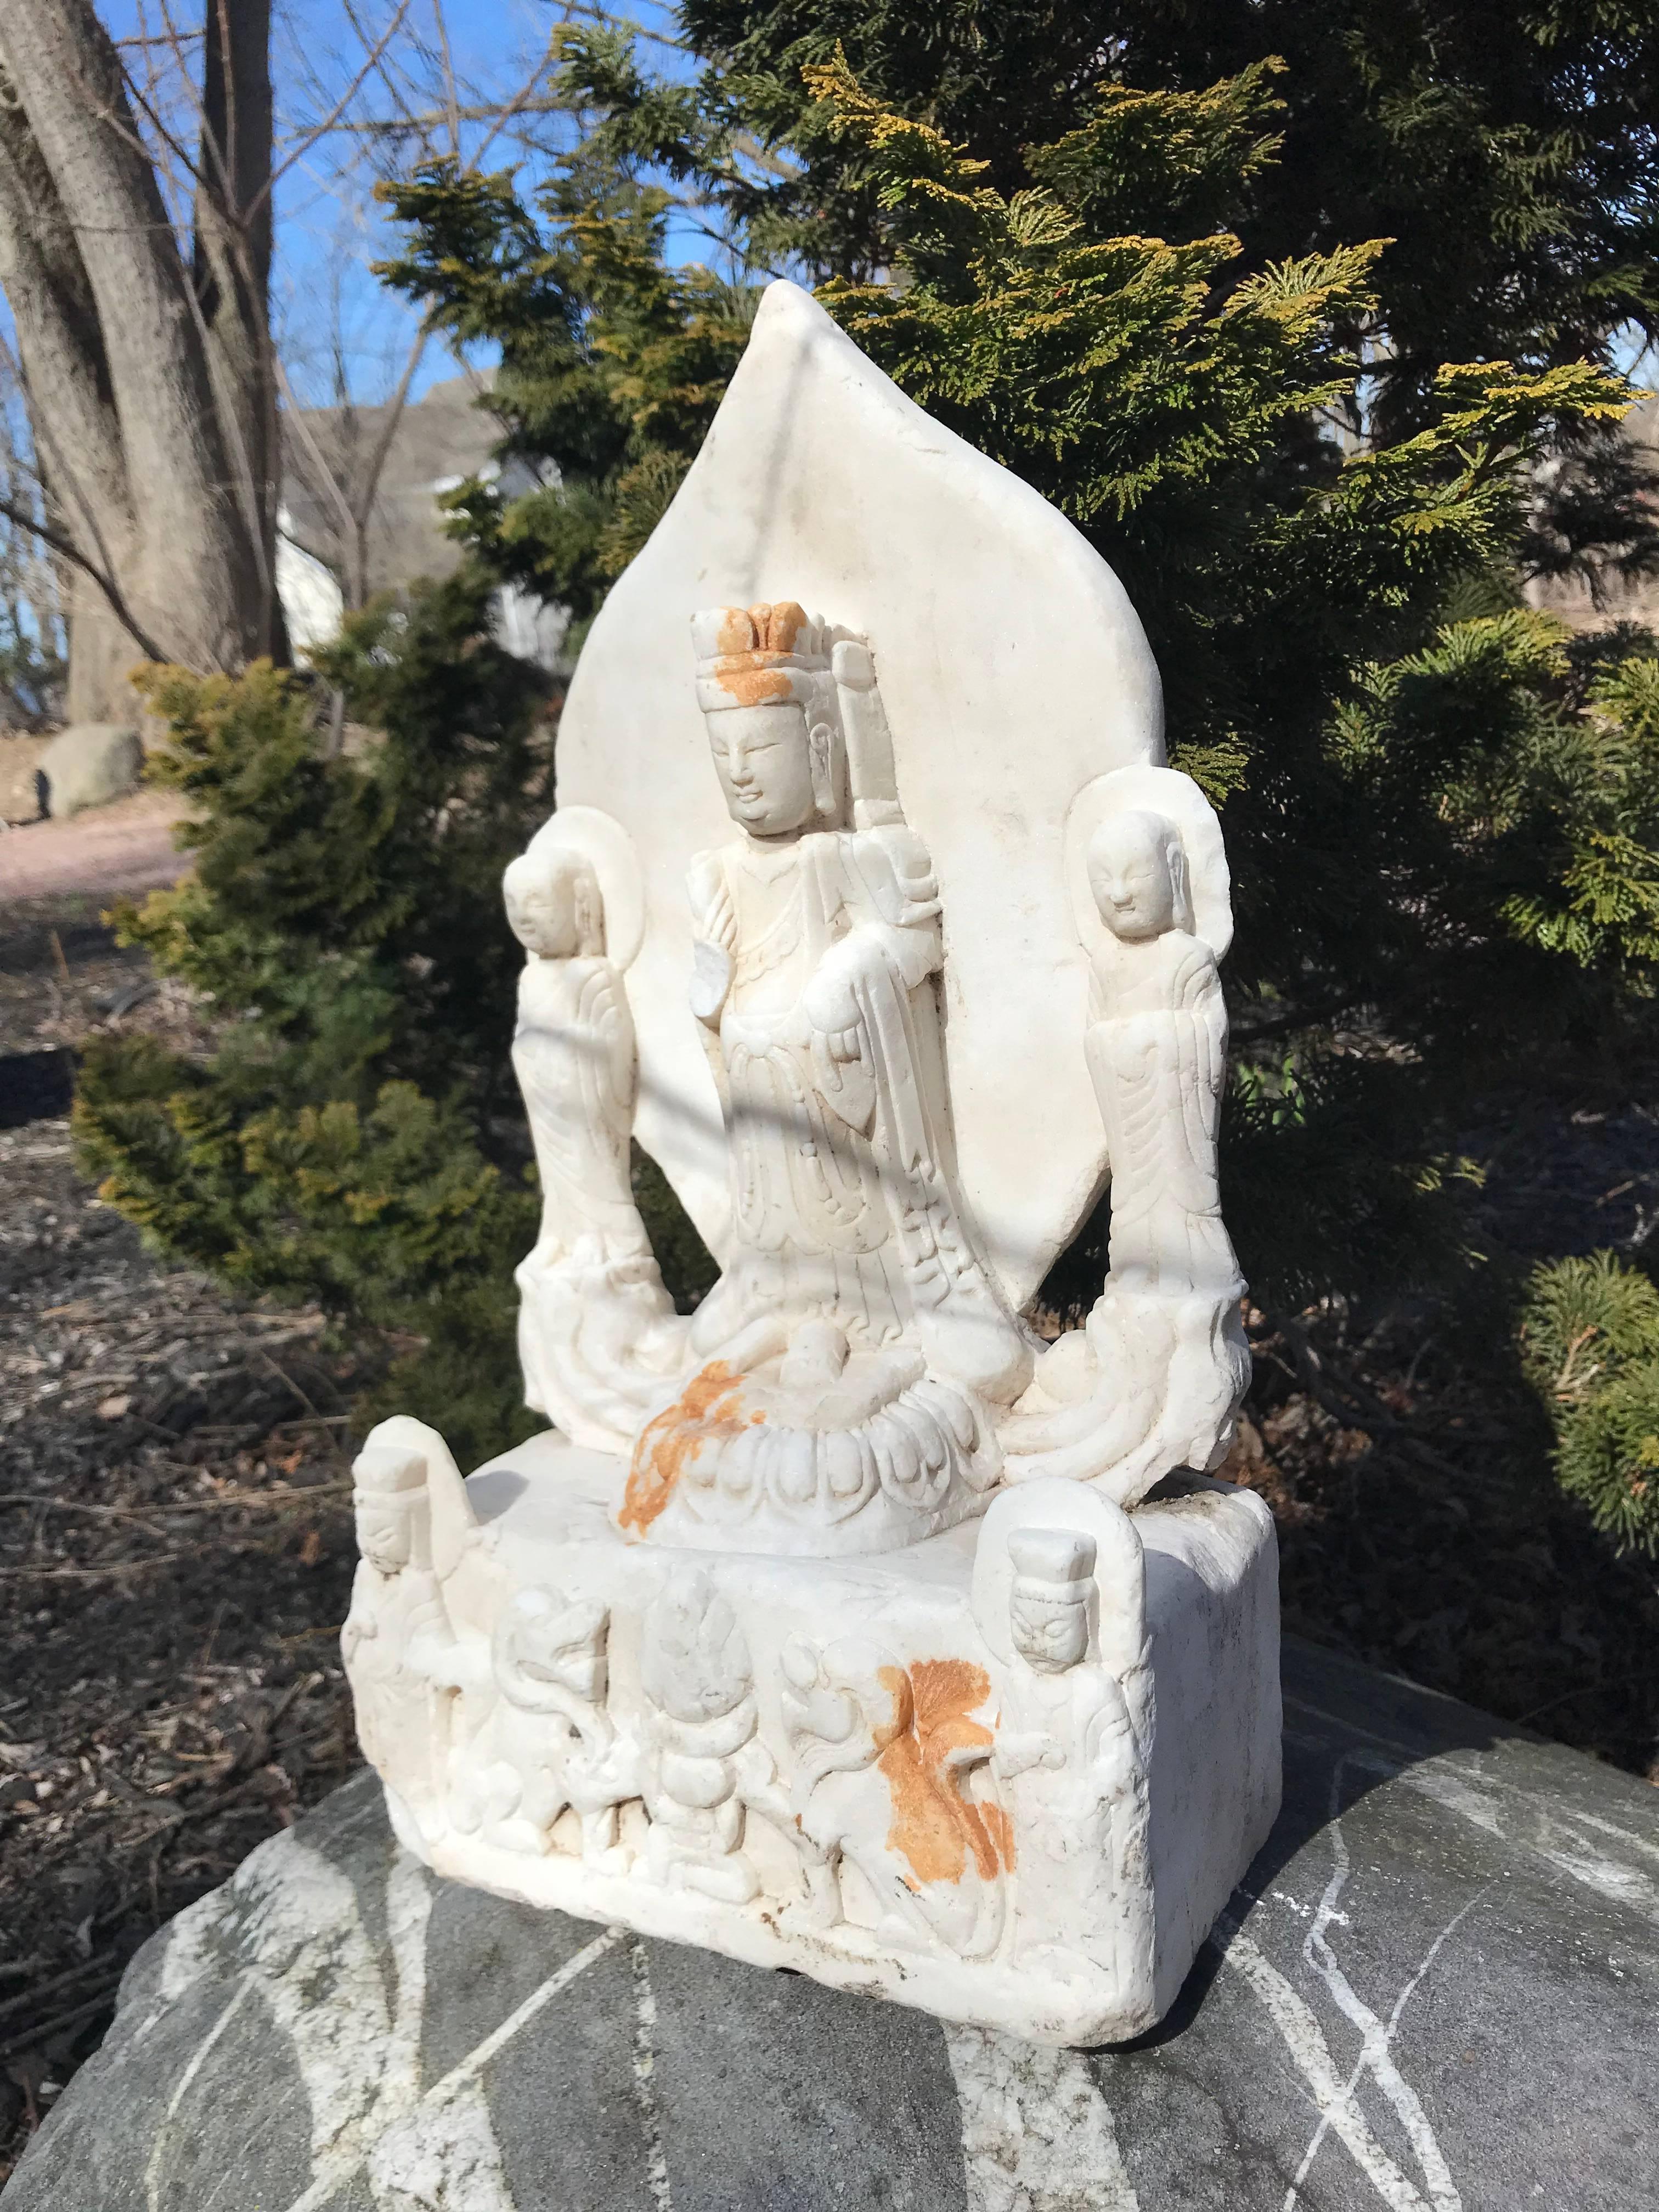 This older hand-carved solid marble sculpture with inscription comes from a 50 year old Chinese antique stone collection formed in the 1970s-1980s. We are offering the last works from this one of a kind group and all date to the 1920s-1940s.

This